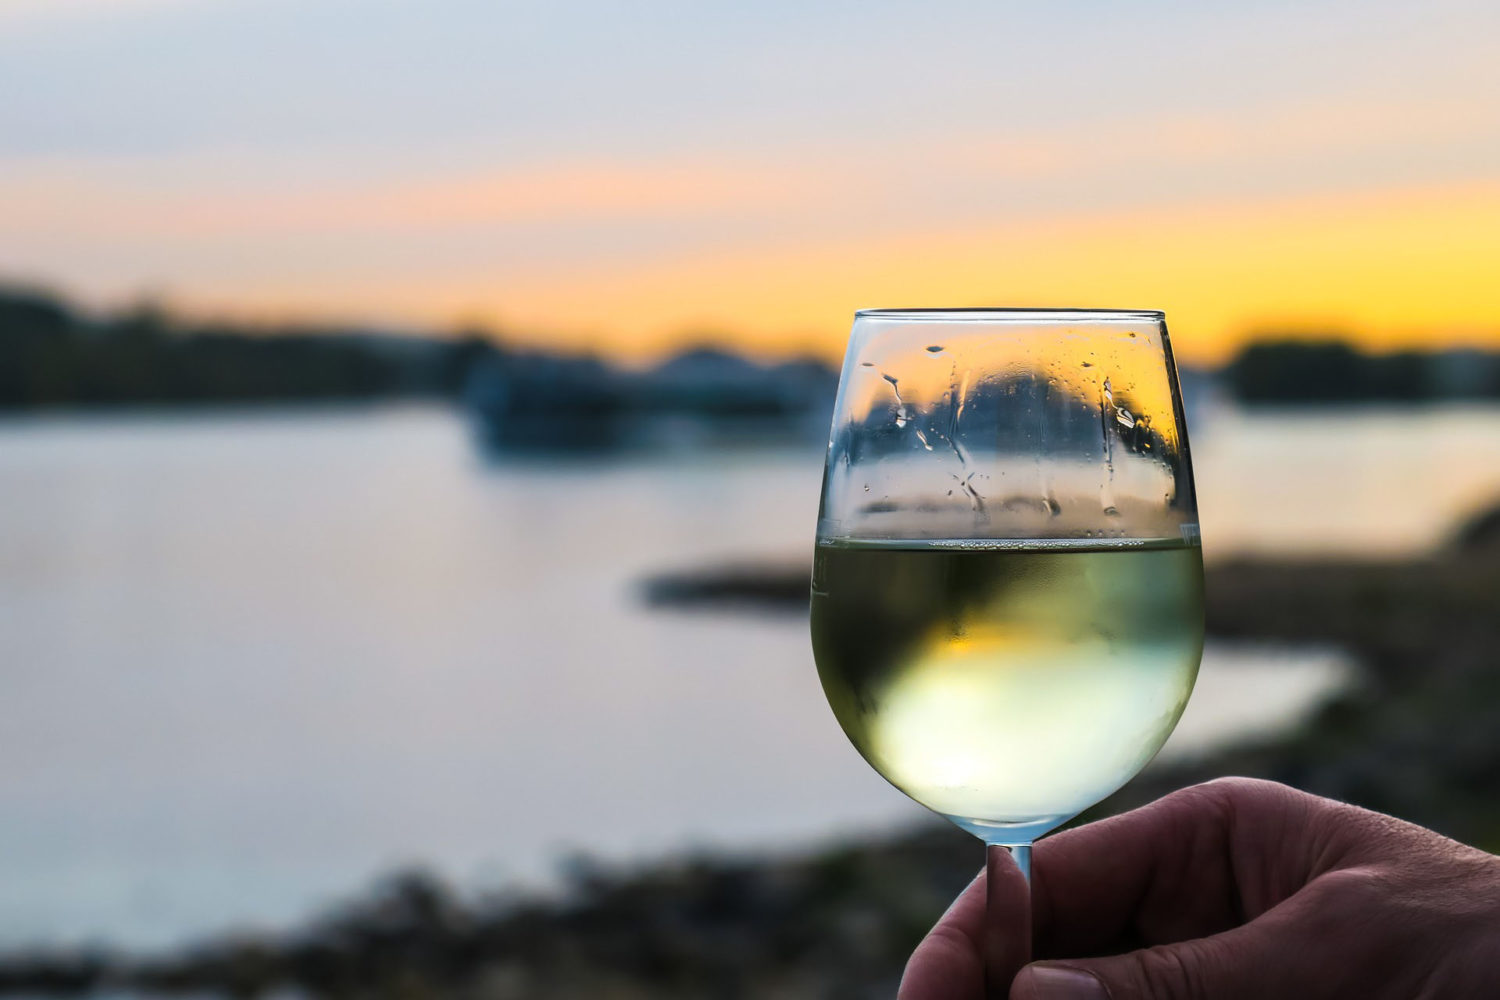 White wine in a glass, against an artistically blurred background of a sunset over water